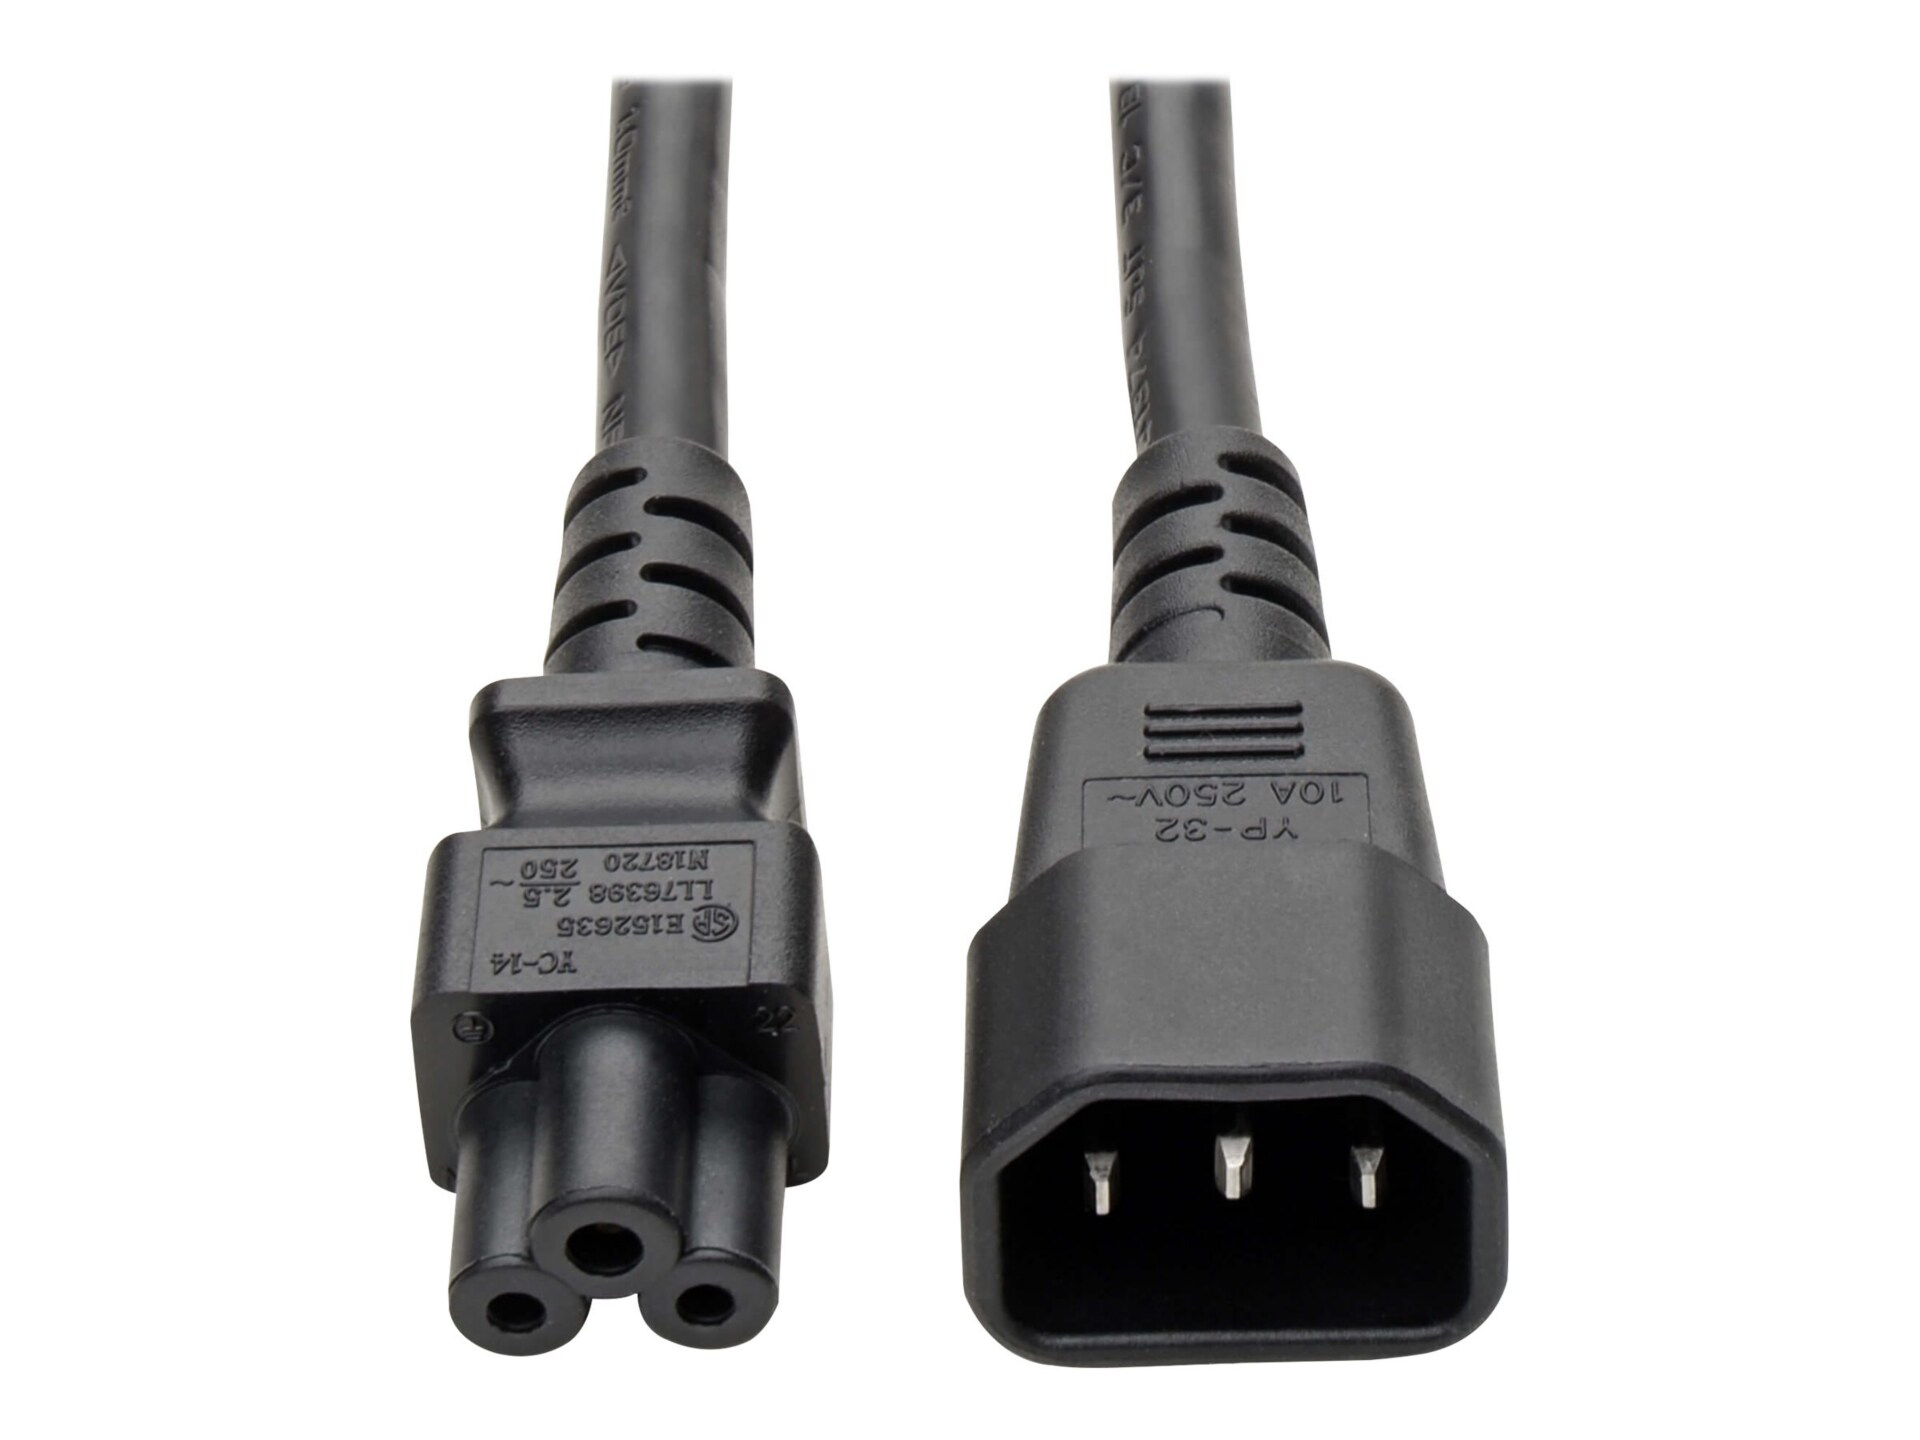 Eaton Tripp Lite Series Laptop Power Adapter Cord, C14 to C5 Adapter - 7A,